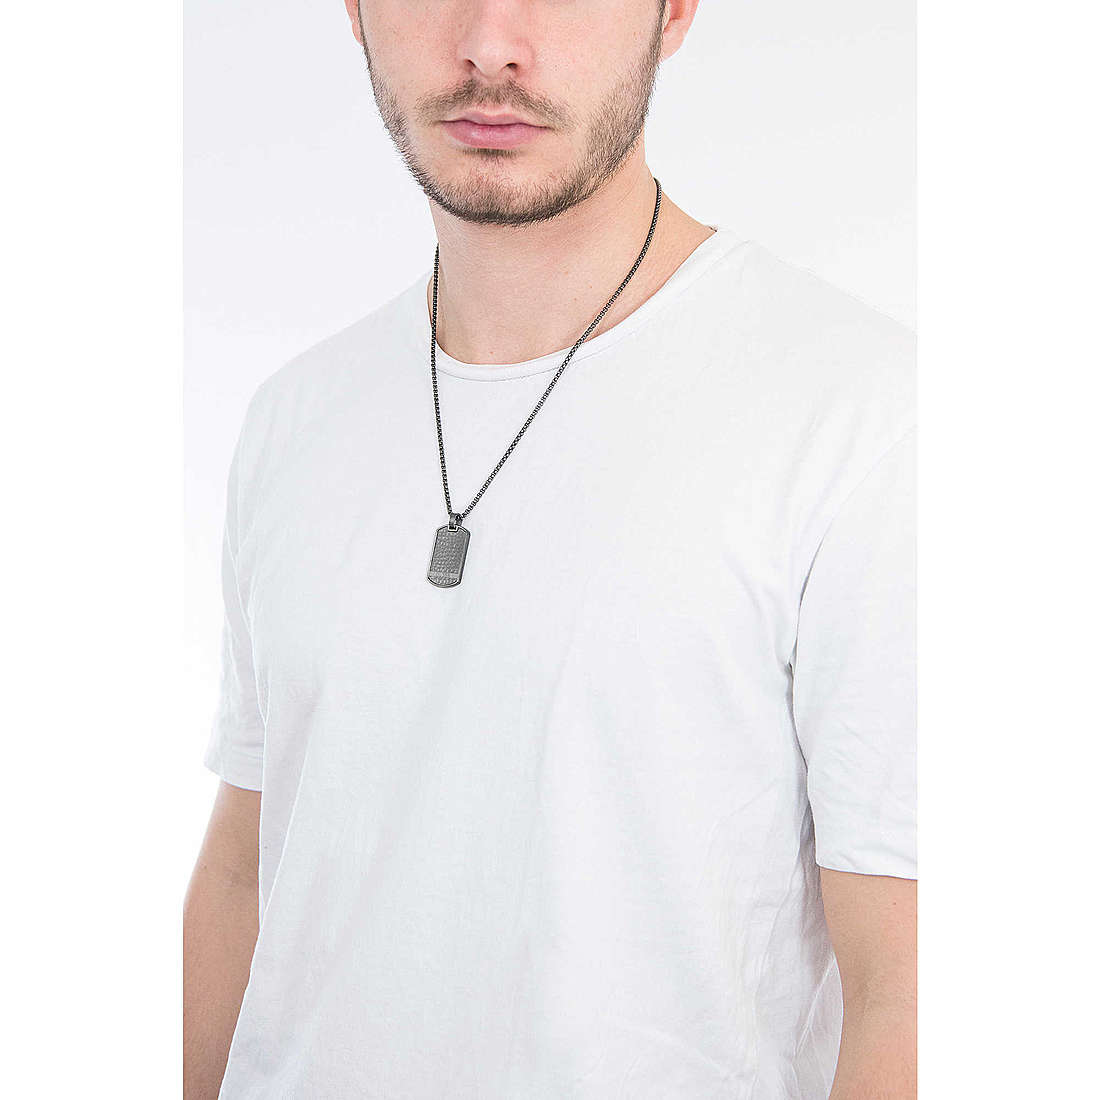 Guess necklaces man UMN29005 wearing